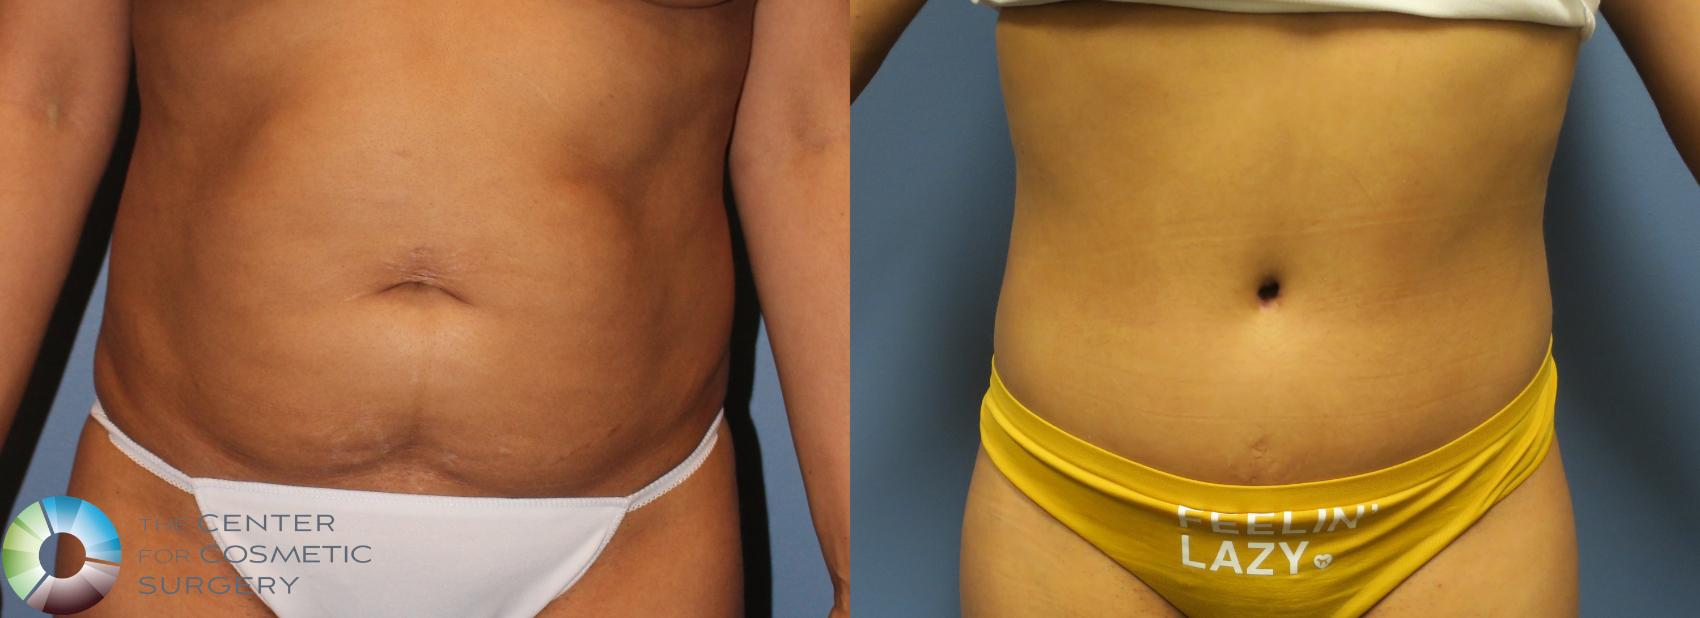 Before & After Tummy Tuck Case 11690 Front View in Golden, CO